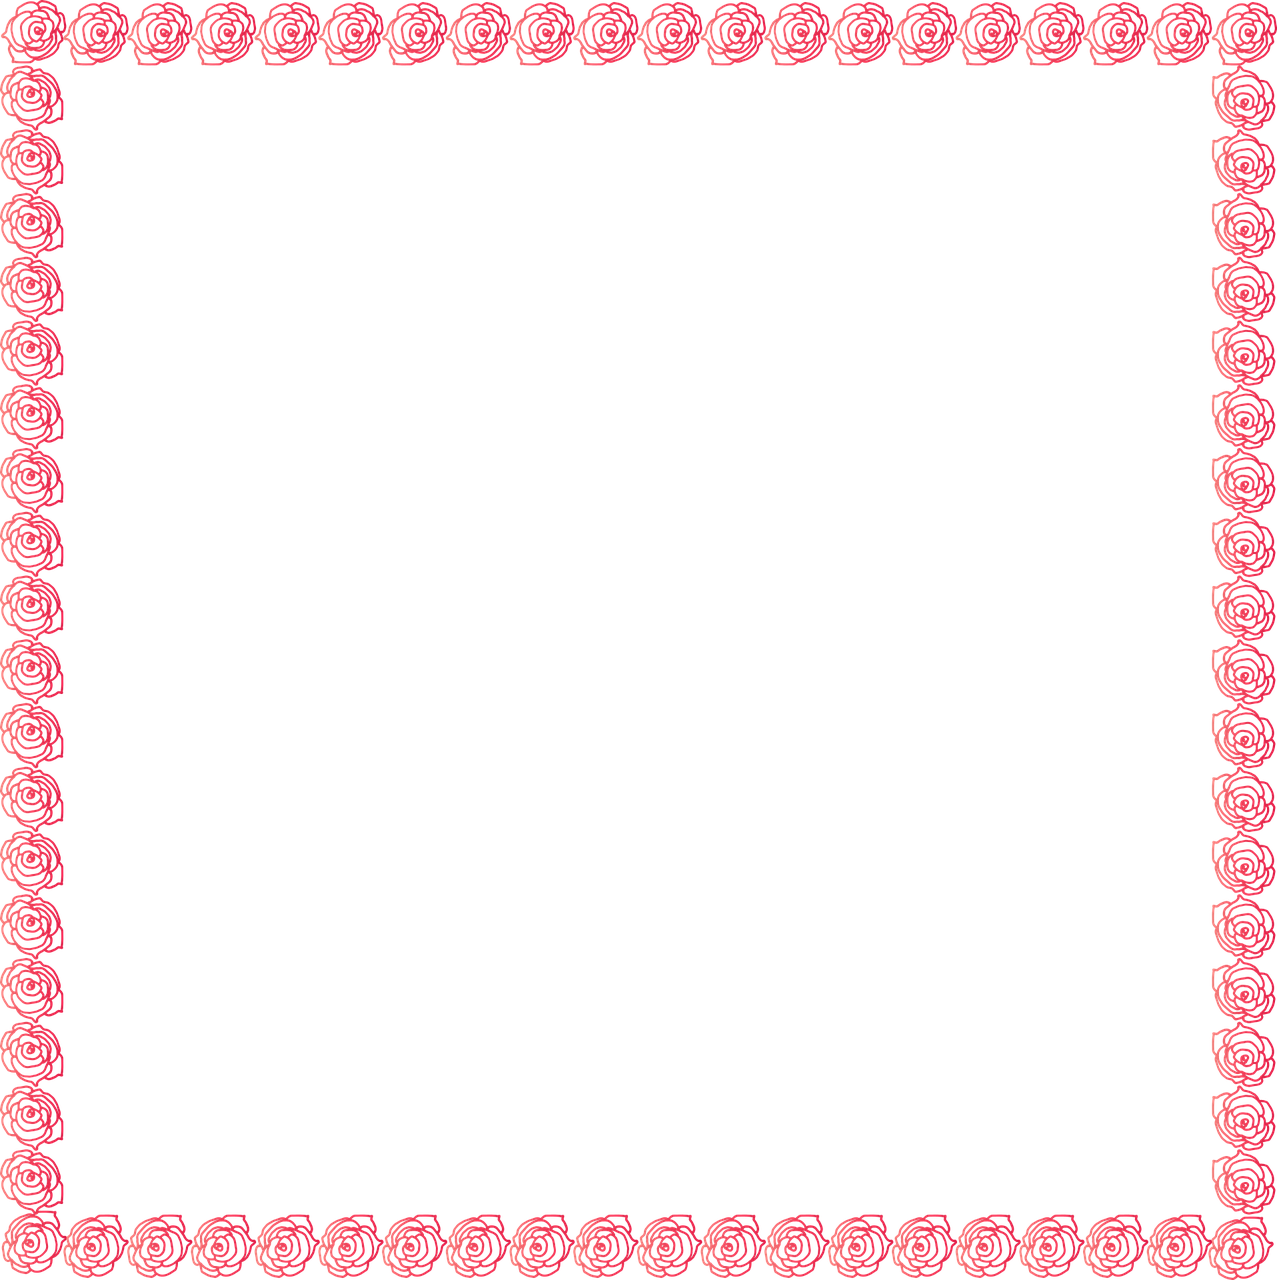 a red frame with hearts on a black background, a digital rendering, computer art, rose garden, simple path traced, high - res, rose twining